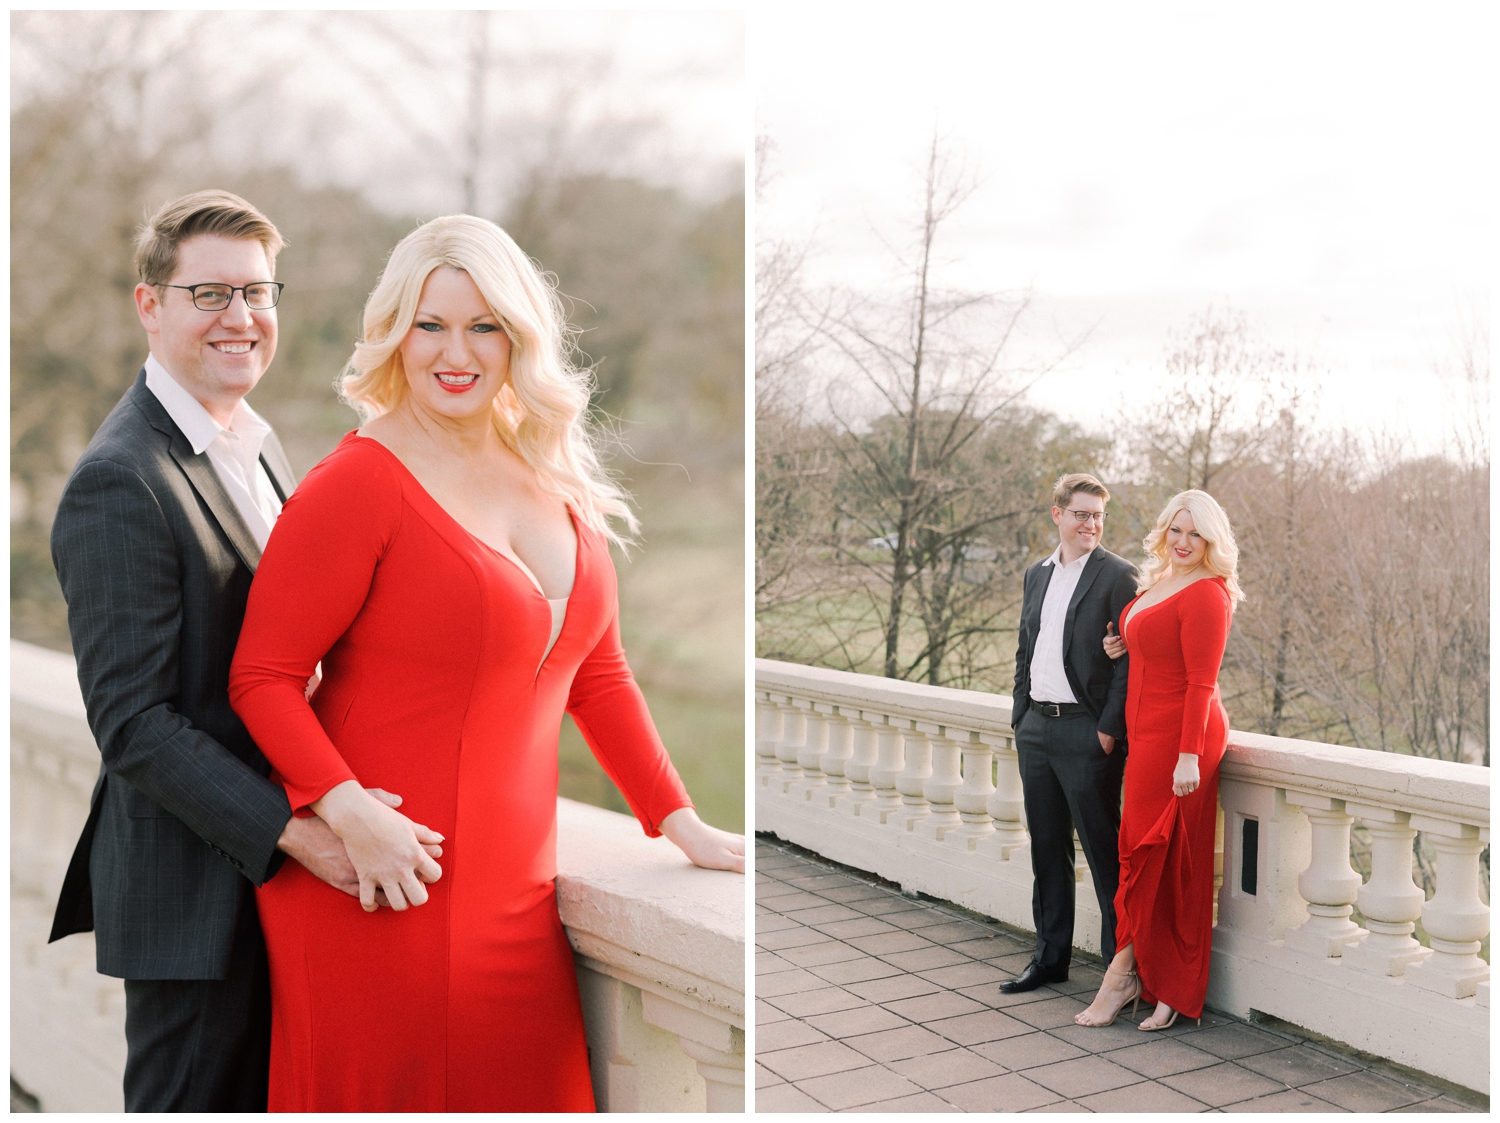 couple posing on Sabine bridge in red dress and suit